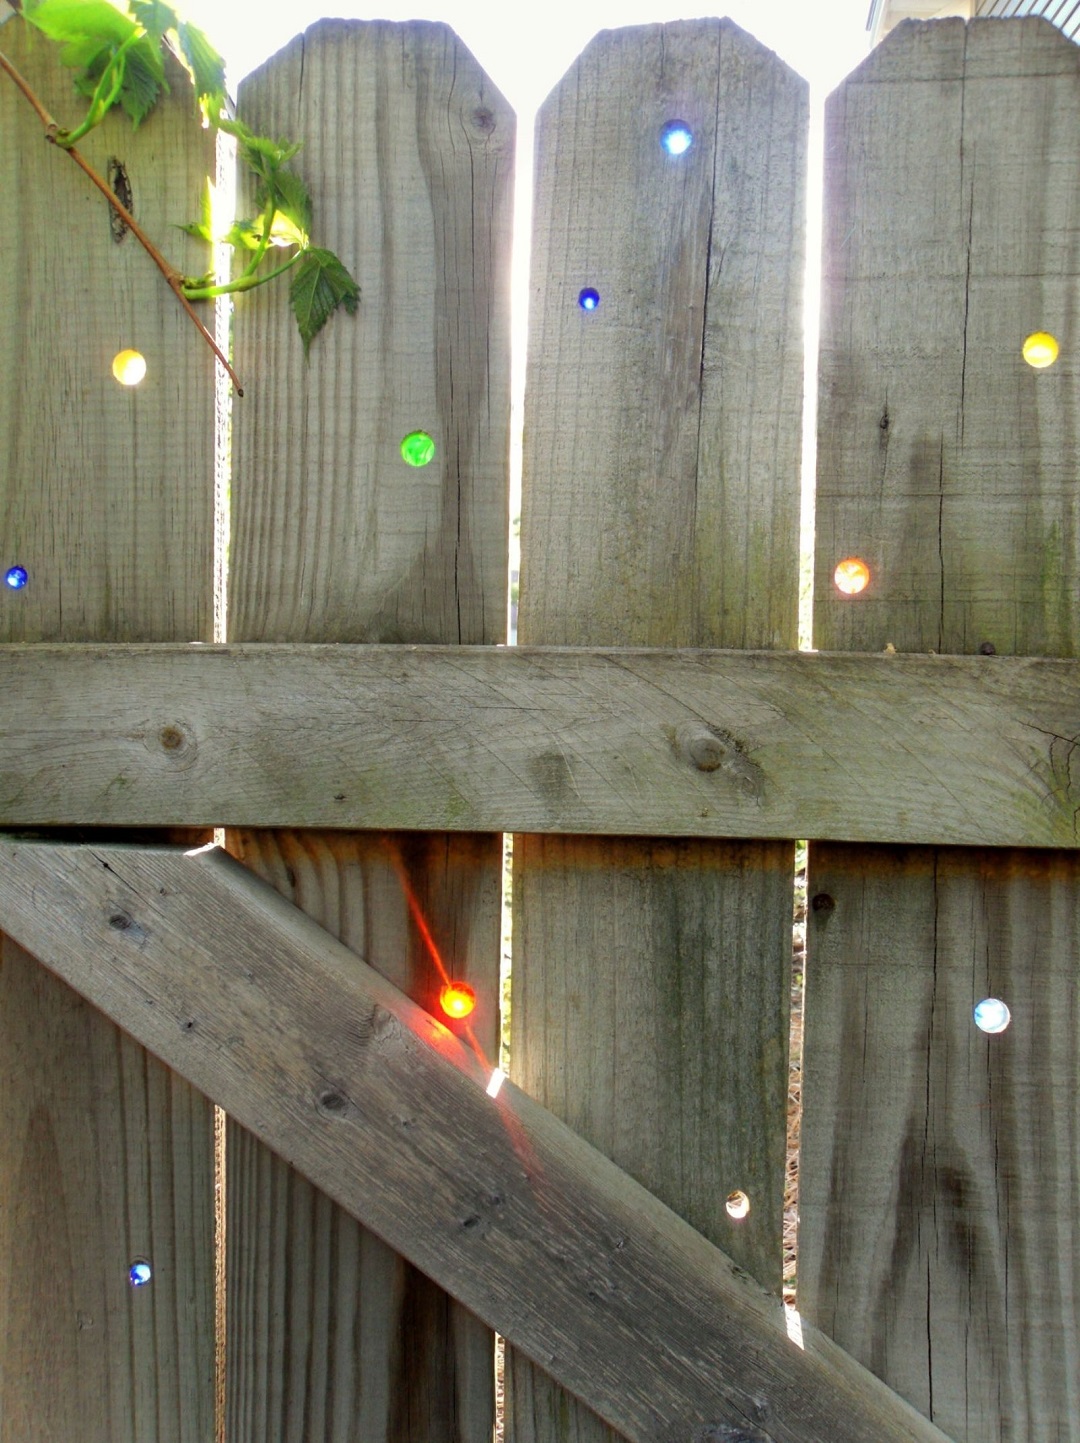 Drill holes into your fence and replace them with marbles.